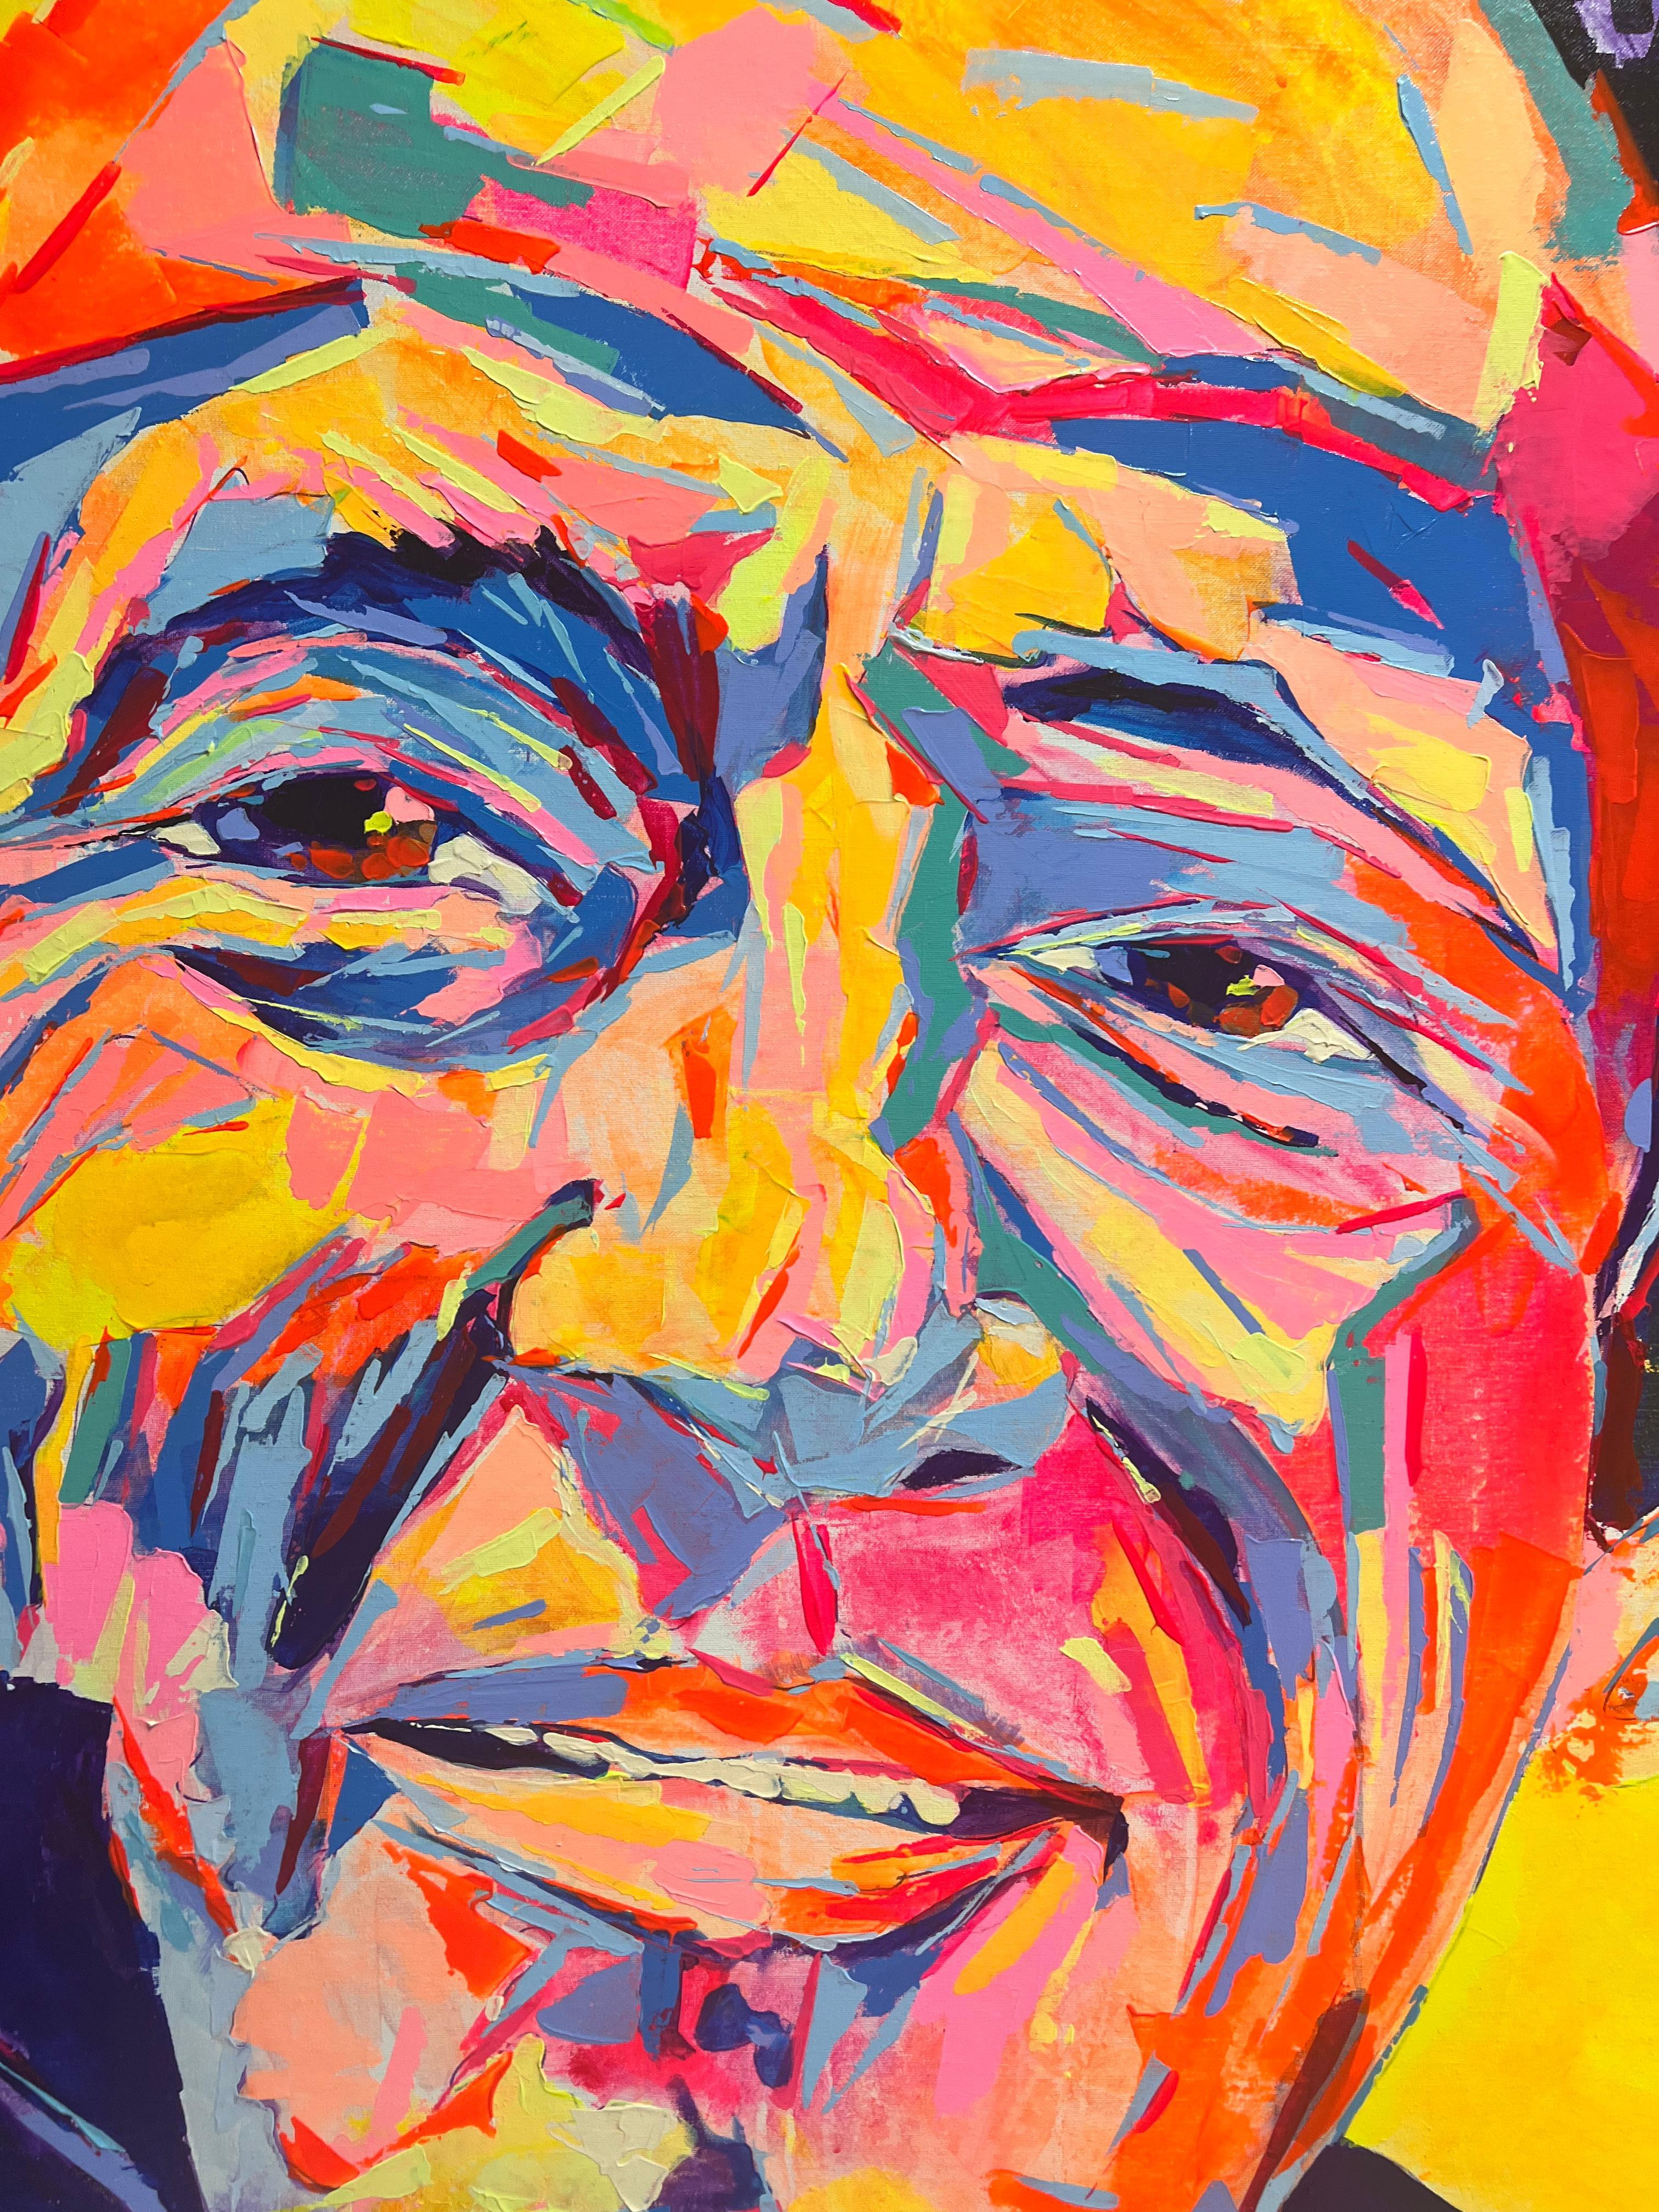 Bruce Springsteen - Pop Art Painting by Federico Lopez